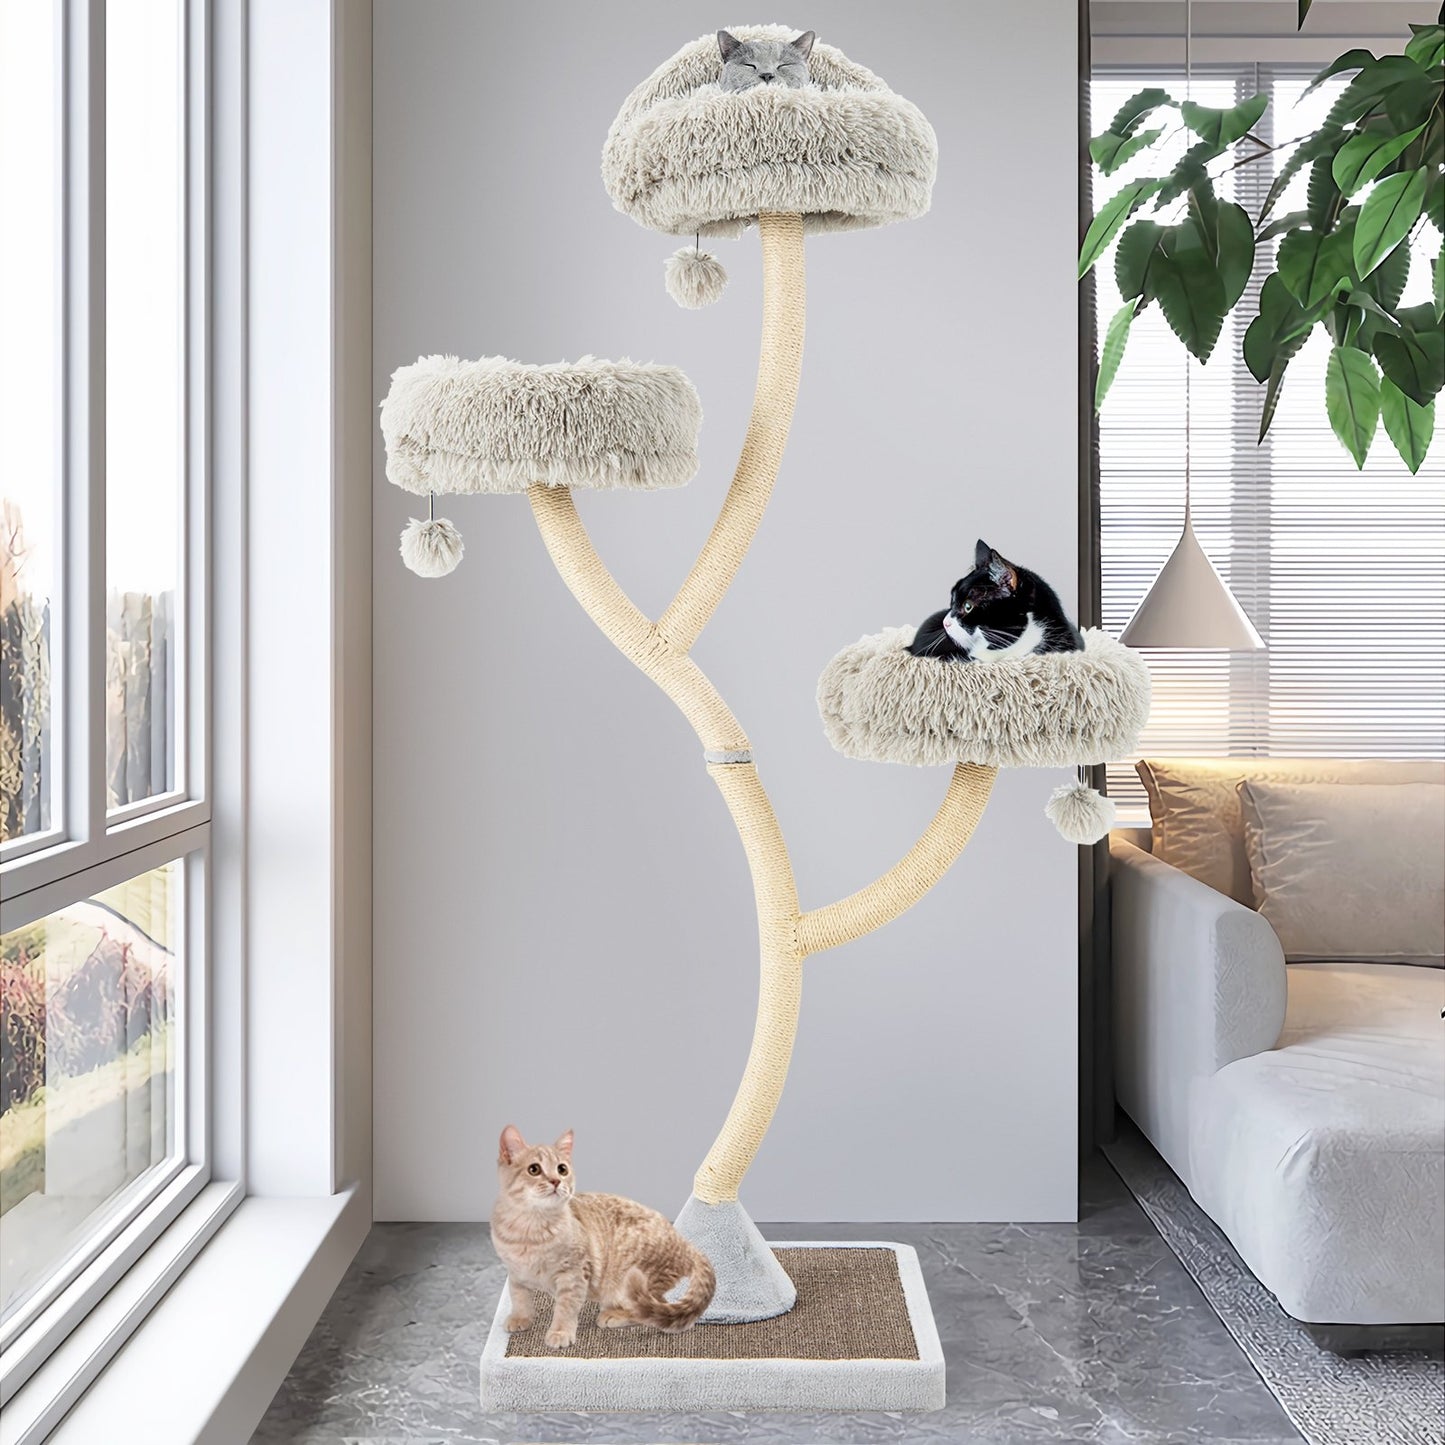 70" Tall Cat Tree 4-Layer Cat Tower with 3 Perches and Dangling Balls, Gray